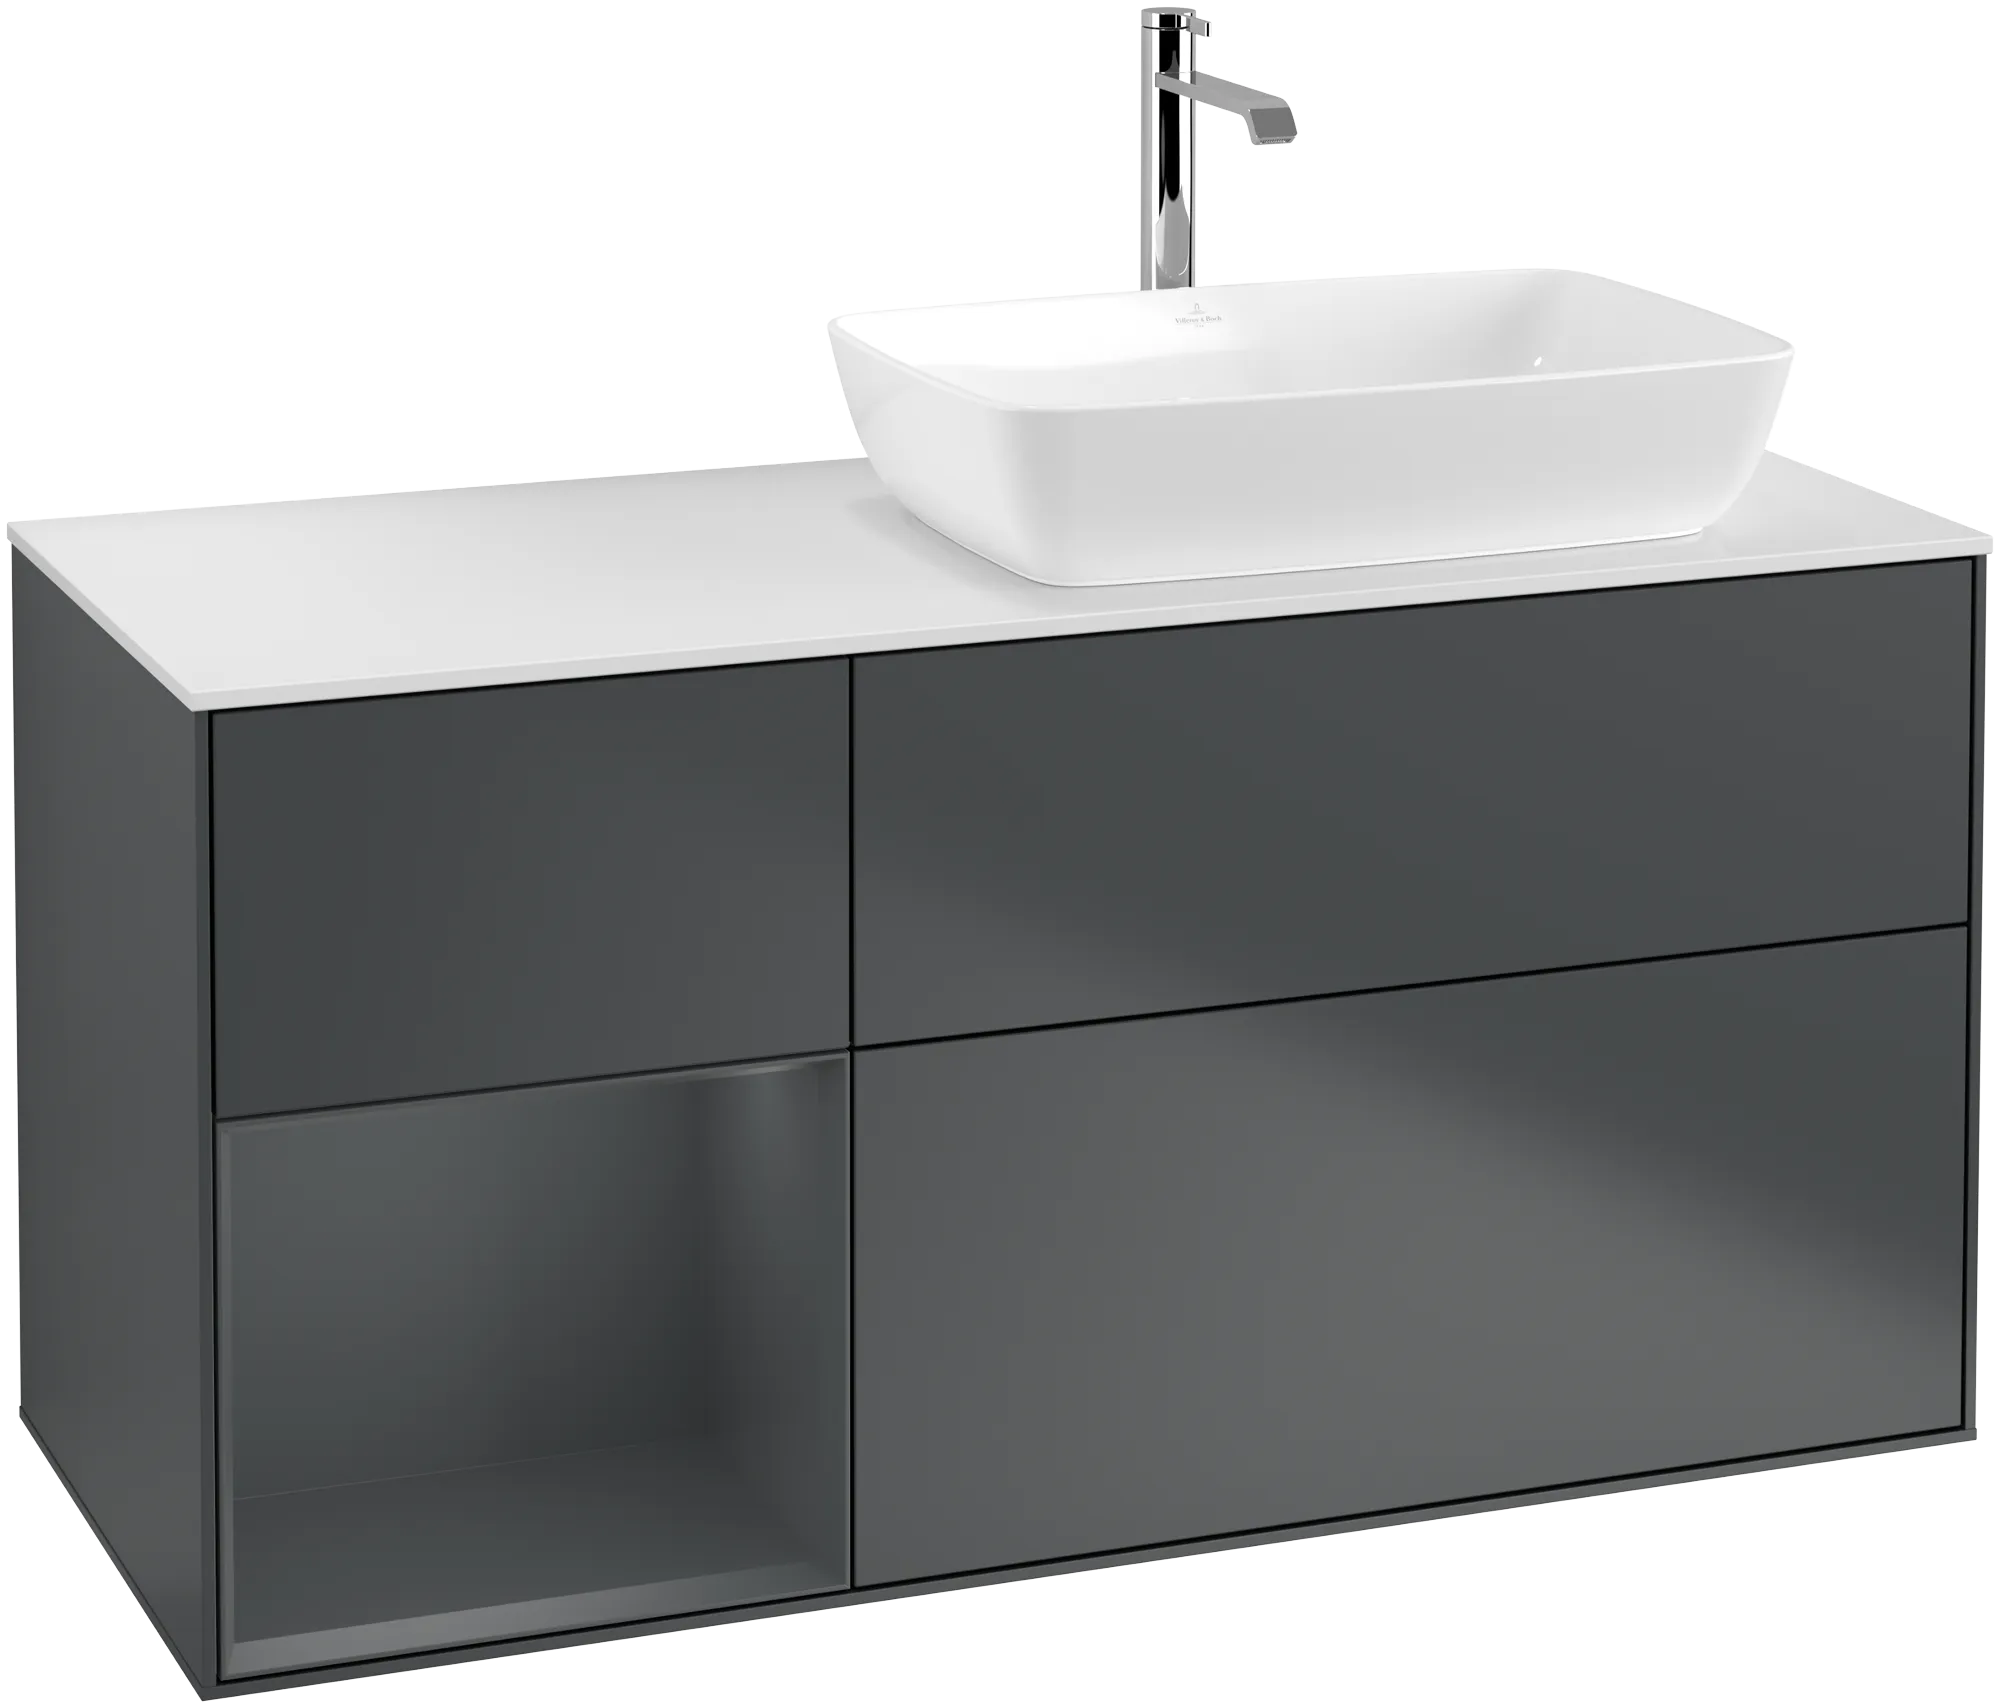 Picture of VILLEROY BOCH Finion Vanity unit, with lighting, 3 pull-out compartments, 1200 x 603 x 501 mm, Midnight Blue Matt Lacquer / Midnight Blue Matt Lacquer / Glass White Matt #G801HGHG